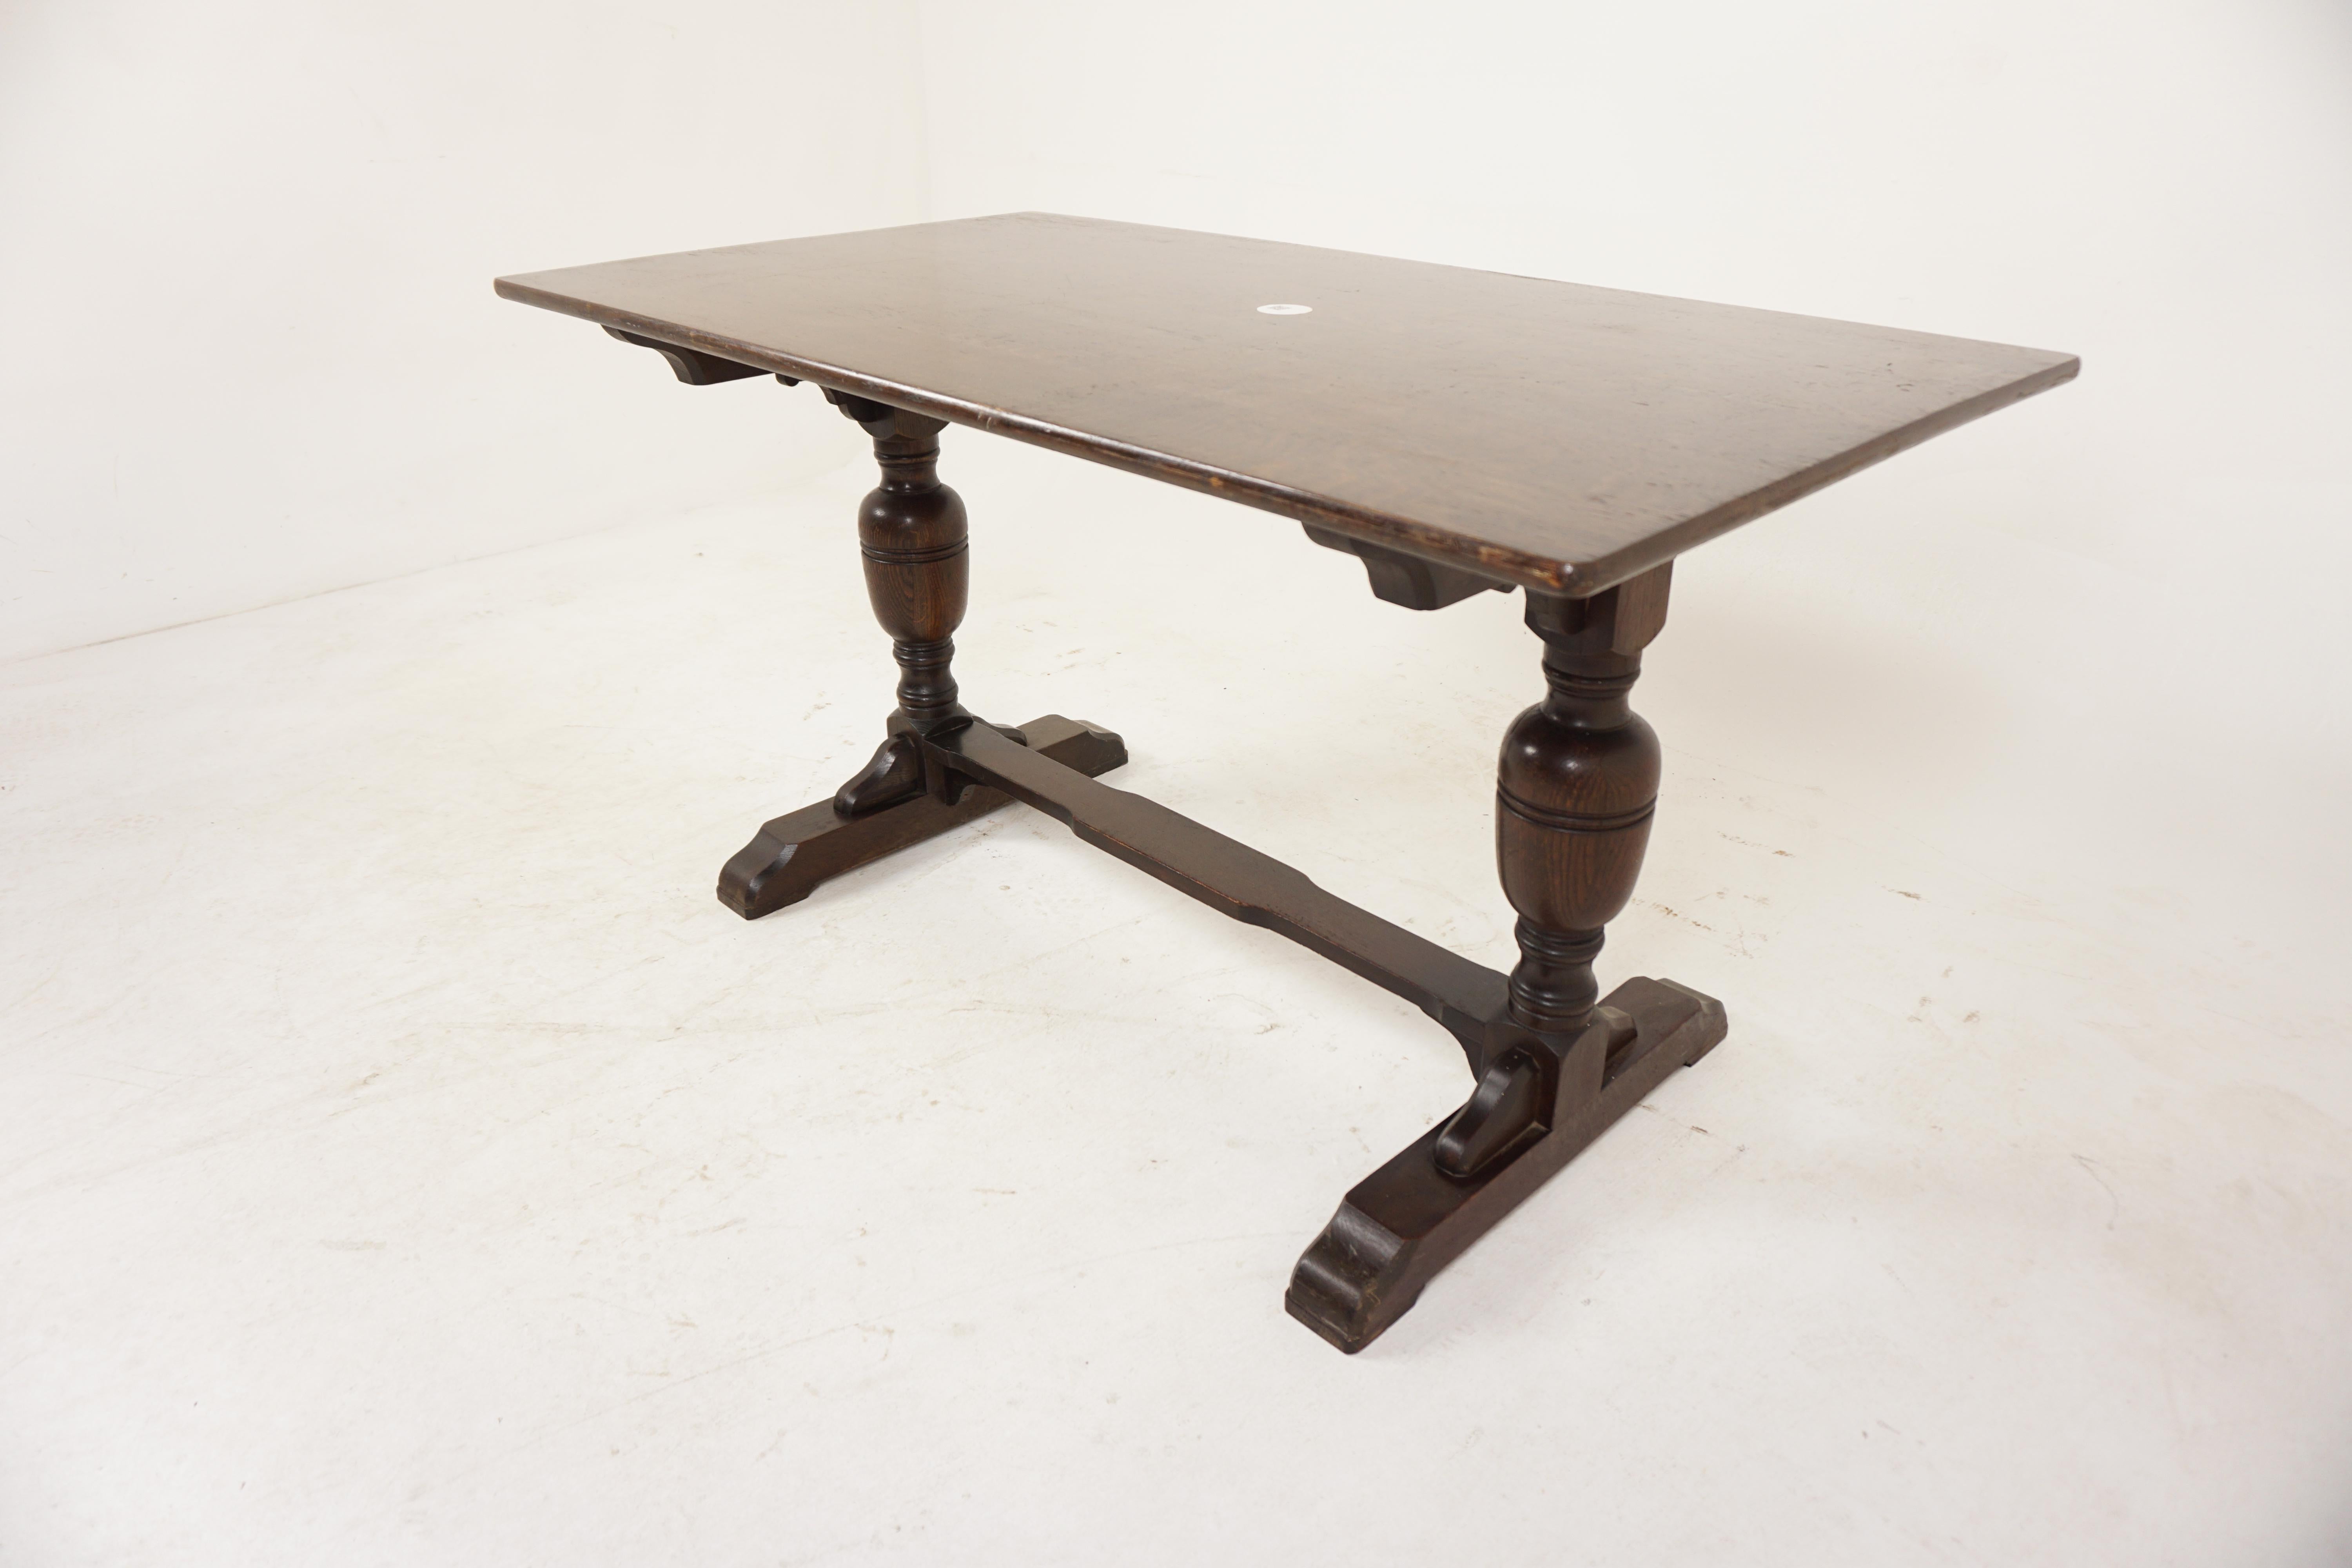 Vintage Tiger Oak Refectory Dining Table, Writing Table, Scotland 1920, H1023

Scotland 1920
Solid Oak
Original Finish
Solid tiger oak top
Pair of bulbous legs on each end
Standing on pair of shaped bases
Connected by a stretcher
Nice